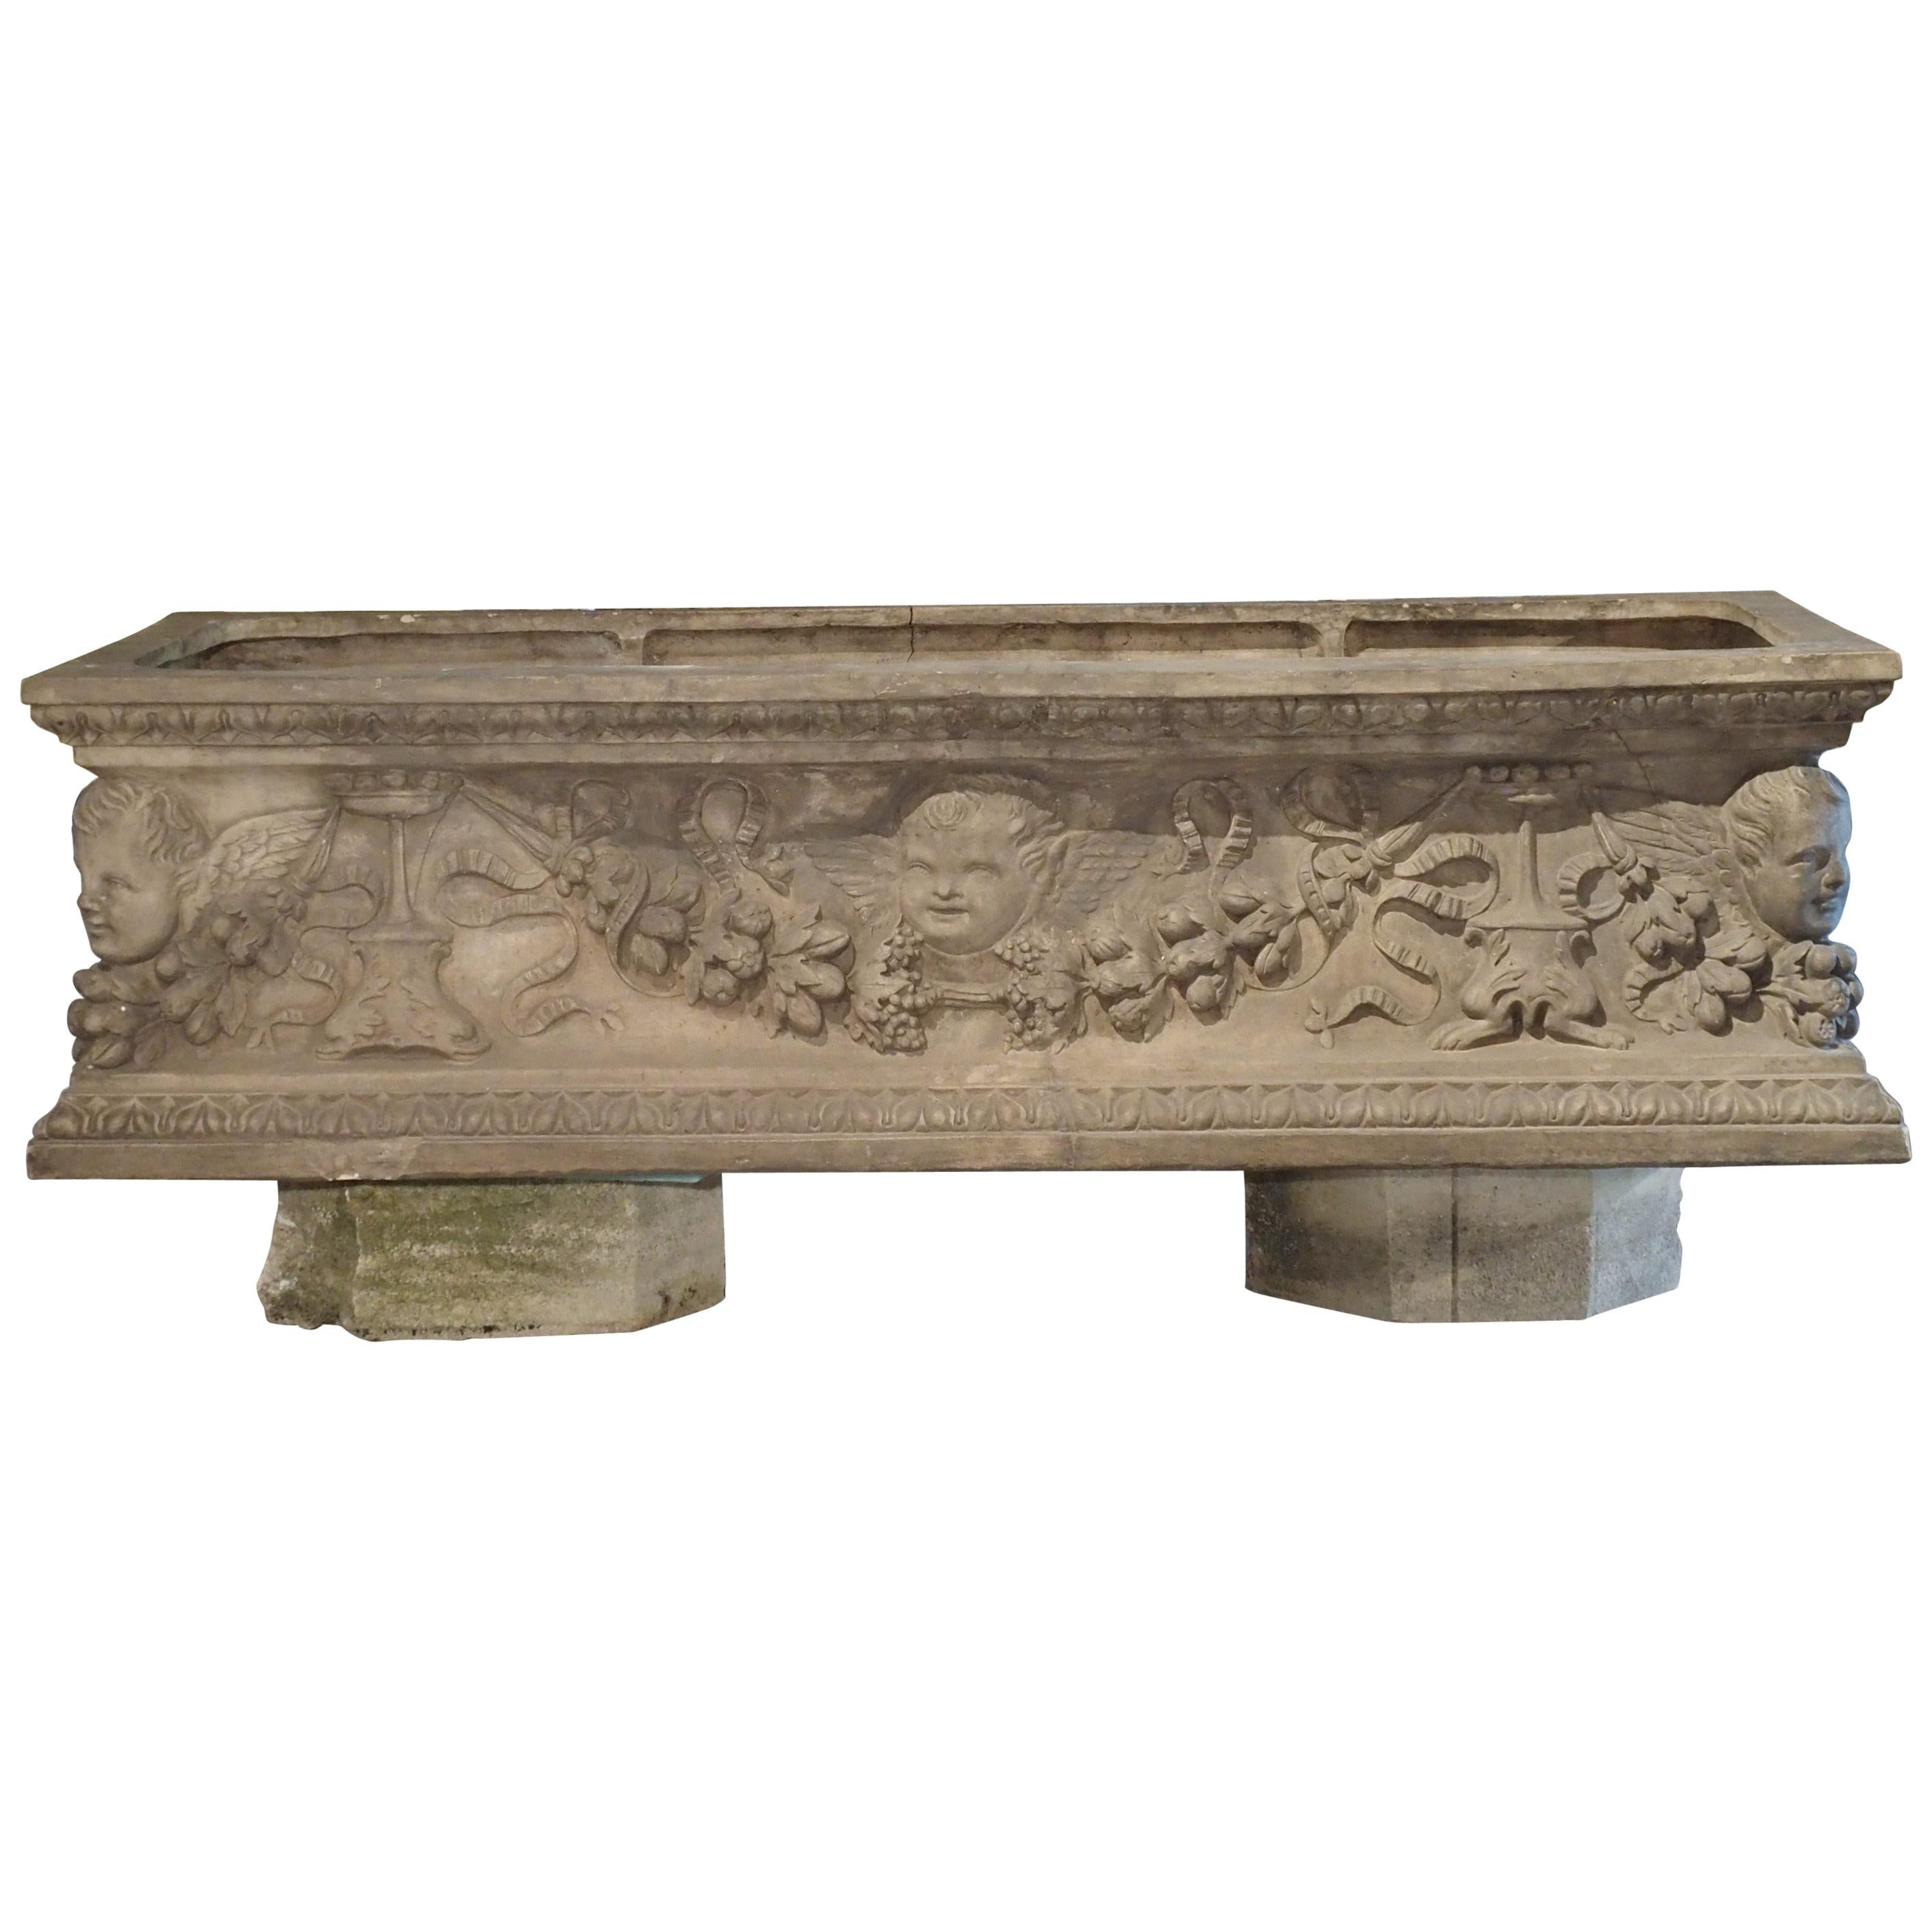 Antique Italian Terracotta Planter with Winged Cherubs and Garlands